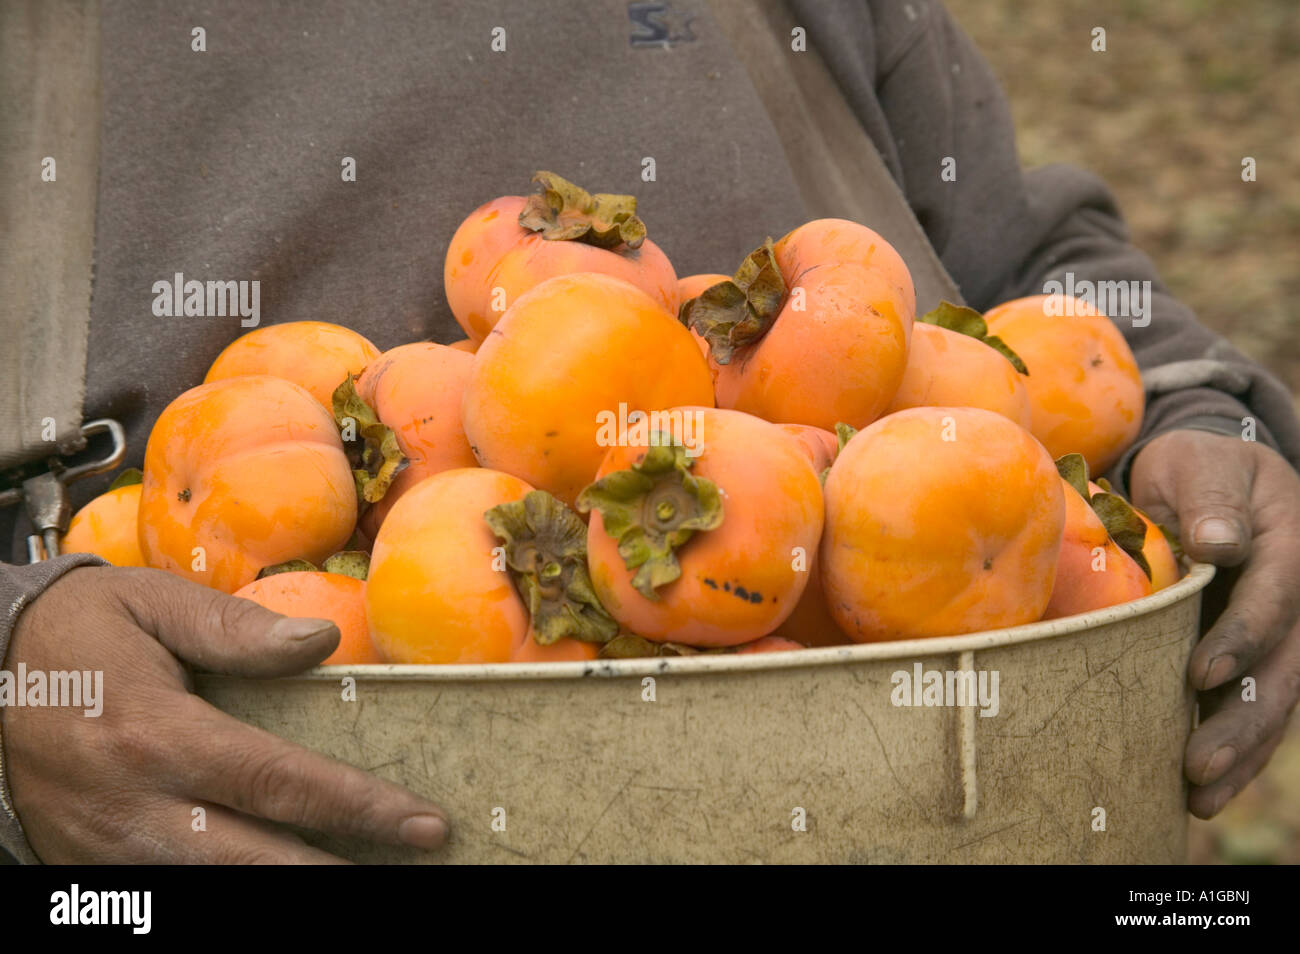 Hands holding bucket with harvested persimmons. Stock Photo